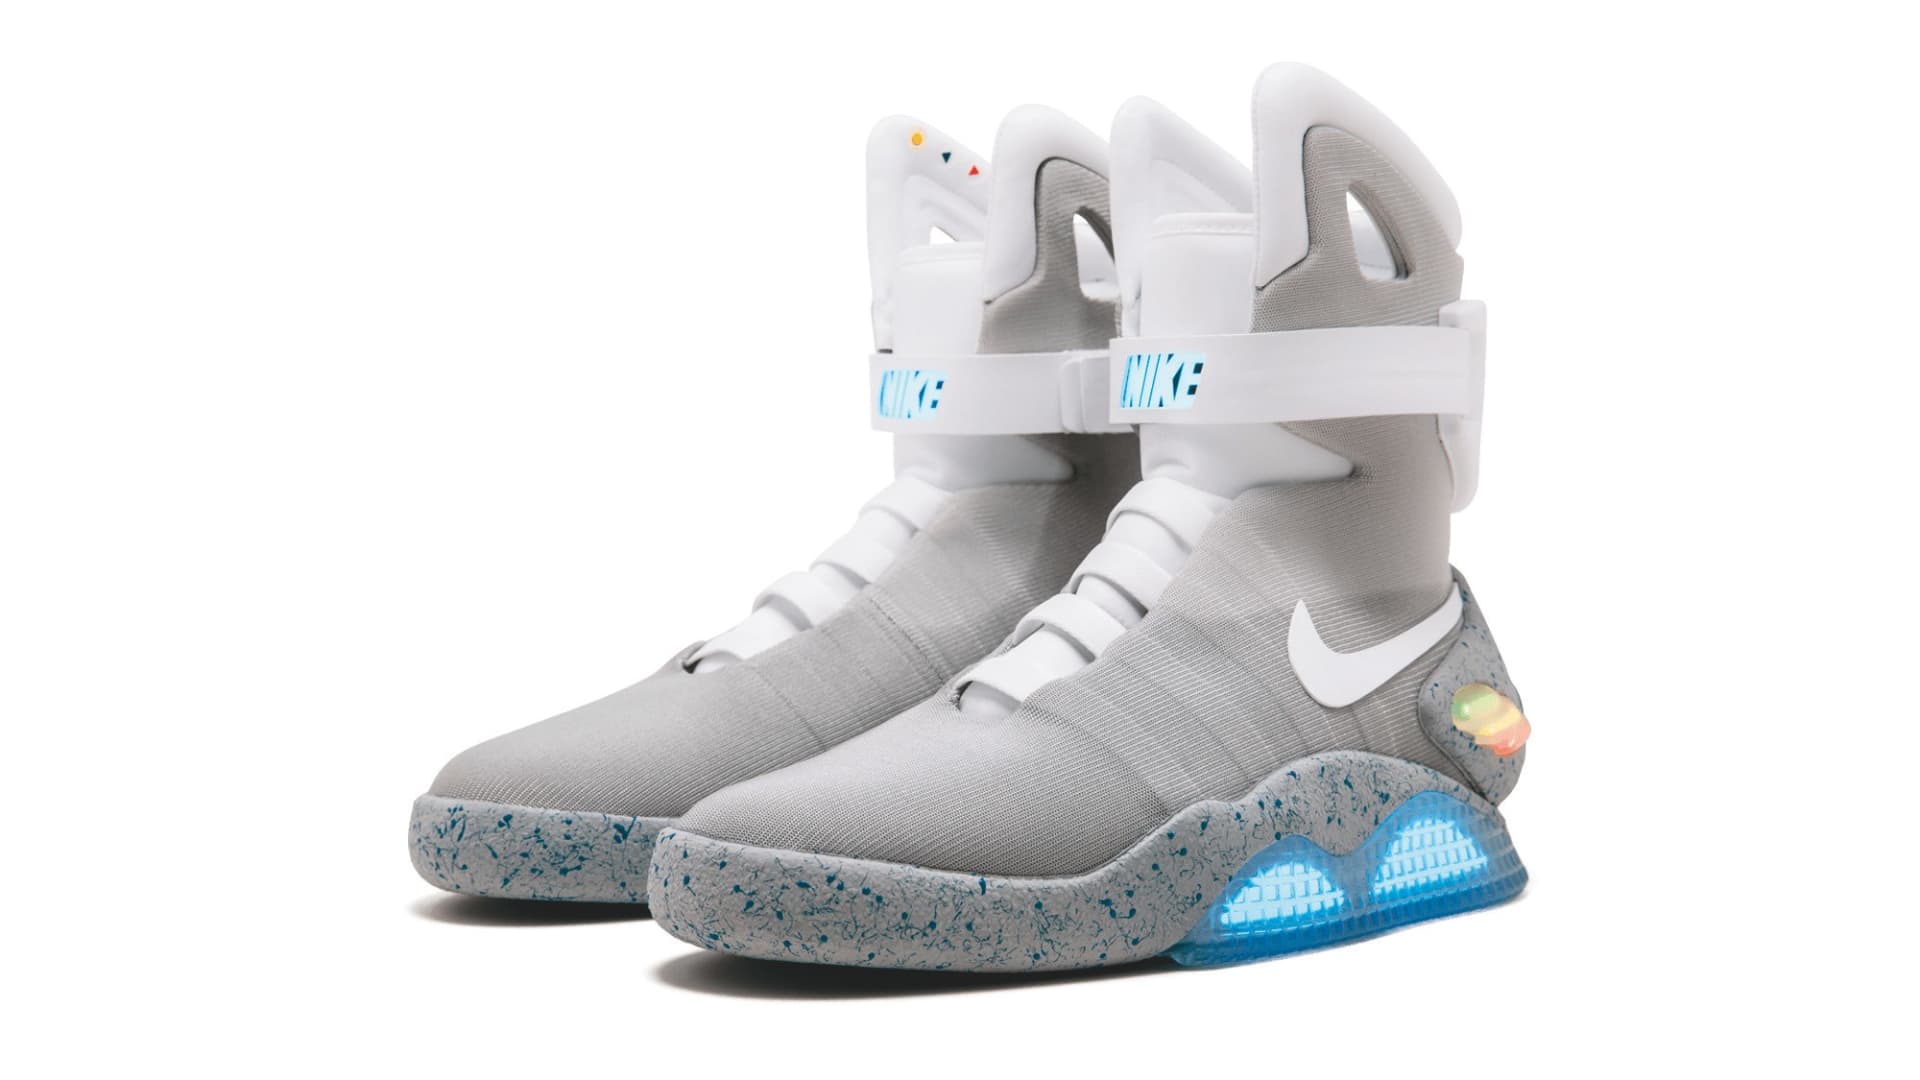 Moans serve curl Nike 'moon shoes' and 'Back to the Future' sneakers up for auction